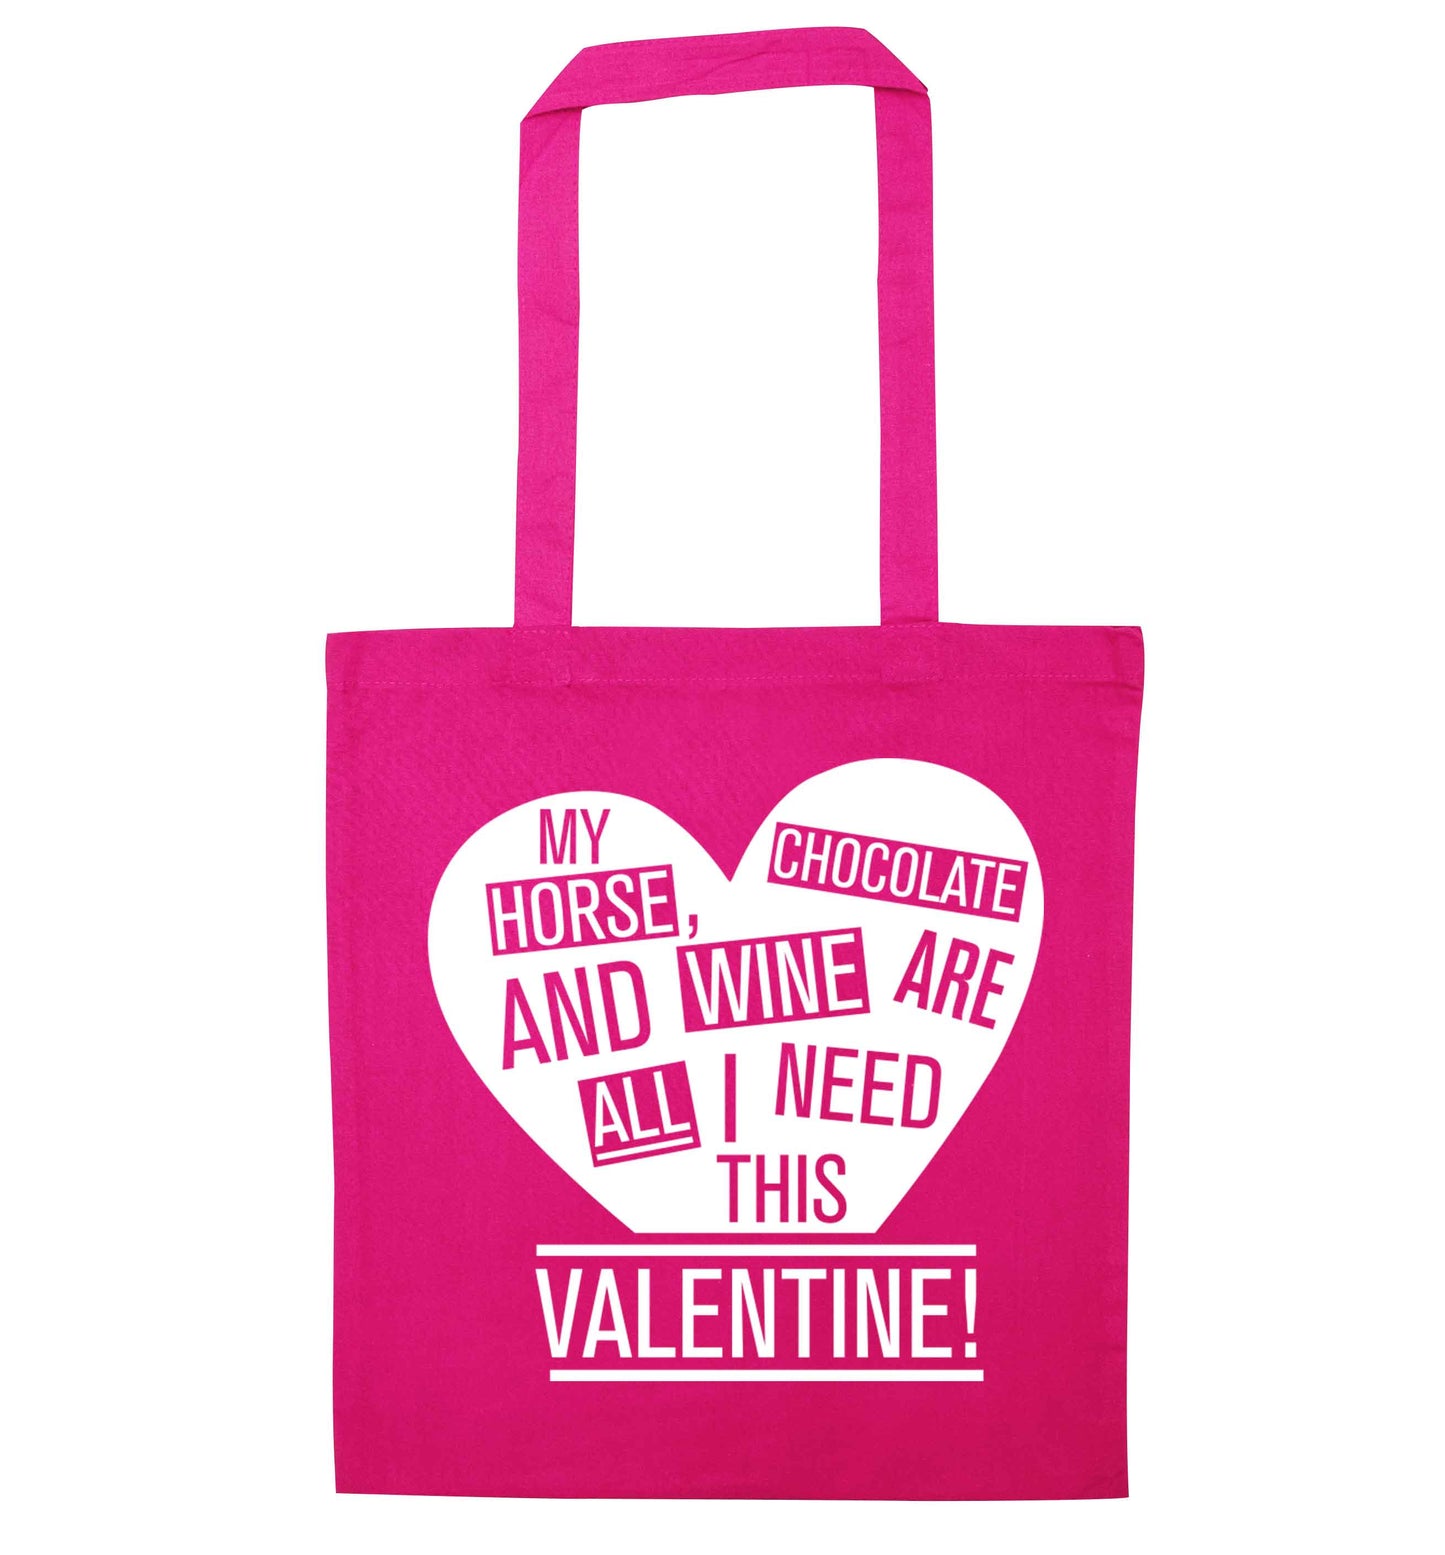 My horse chocolate and wine are all I need this valentine pink tote bag